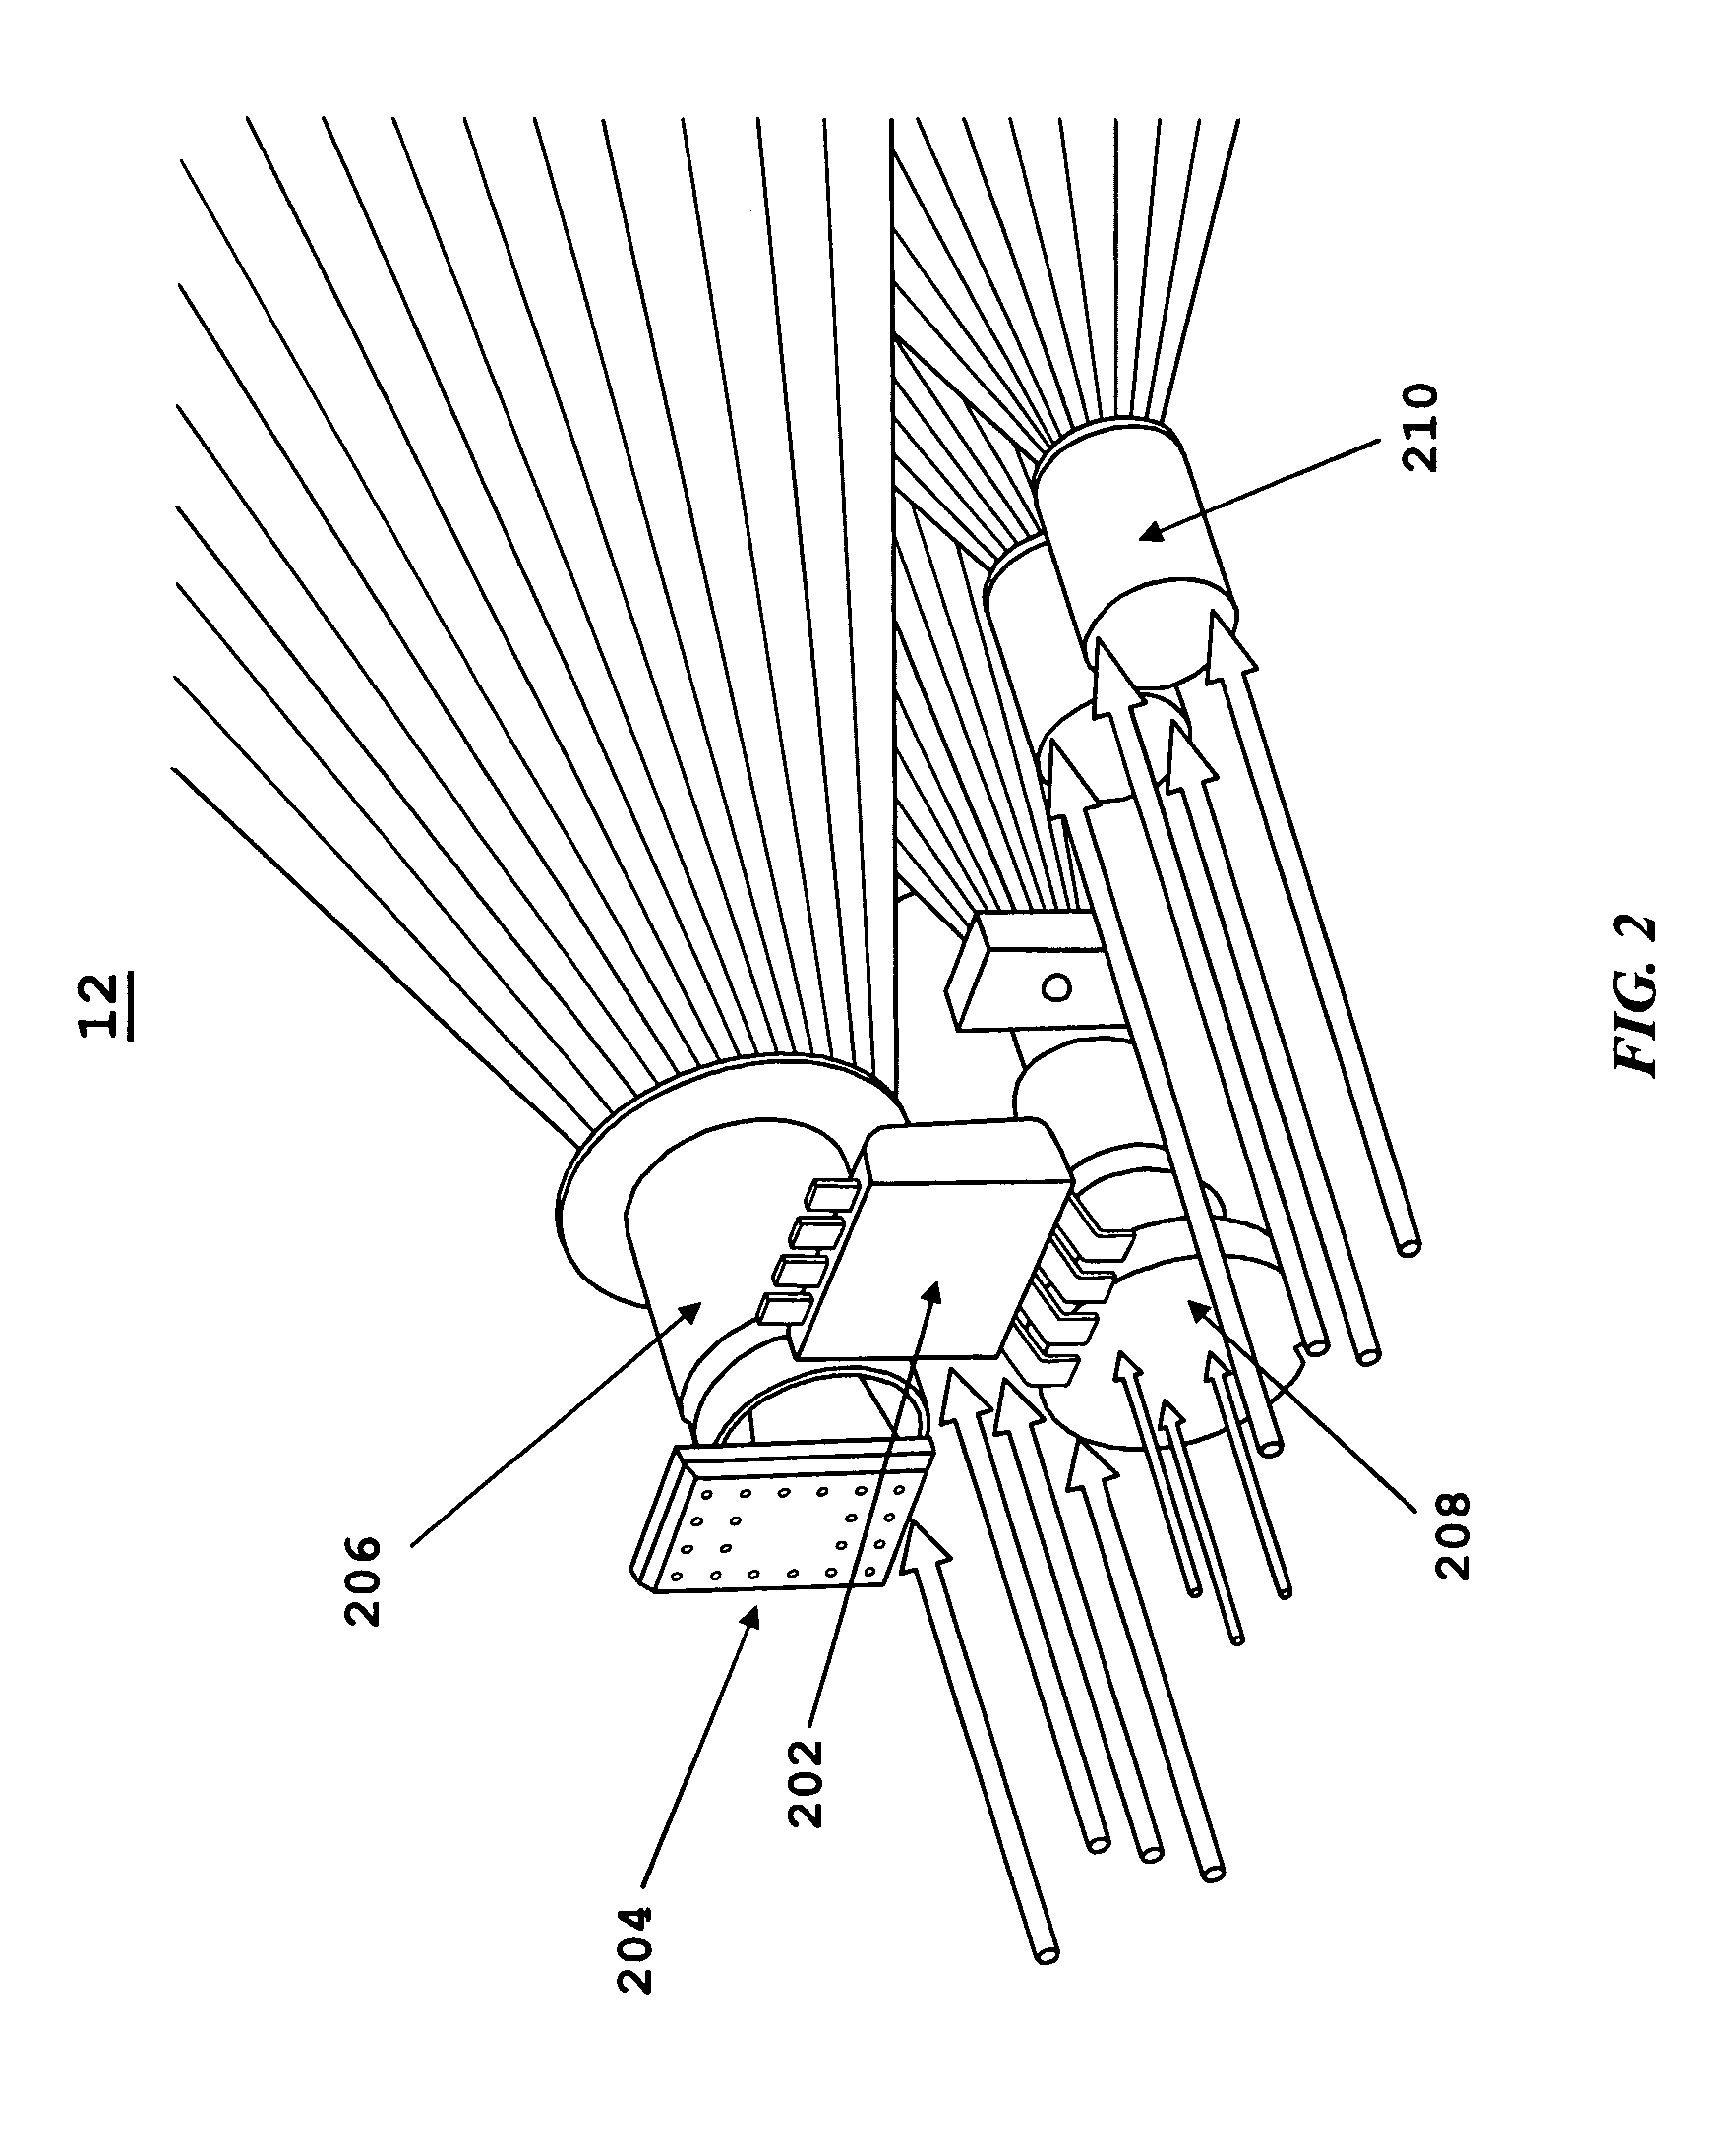 System and method for sensing ambient light in an optical code reader